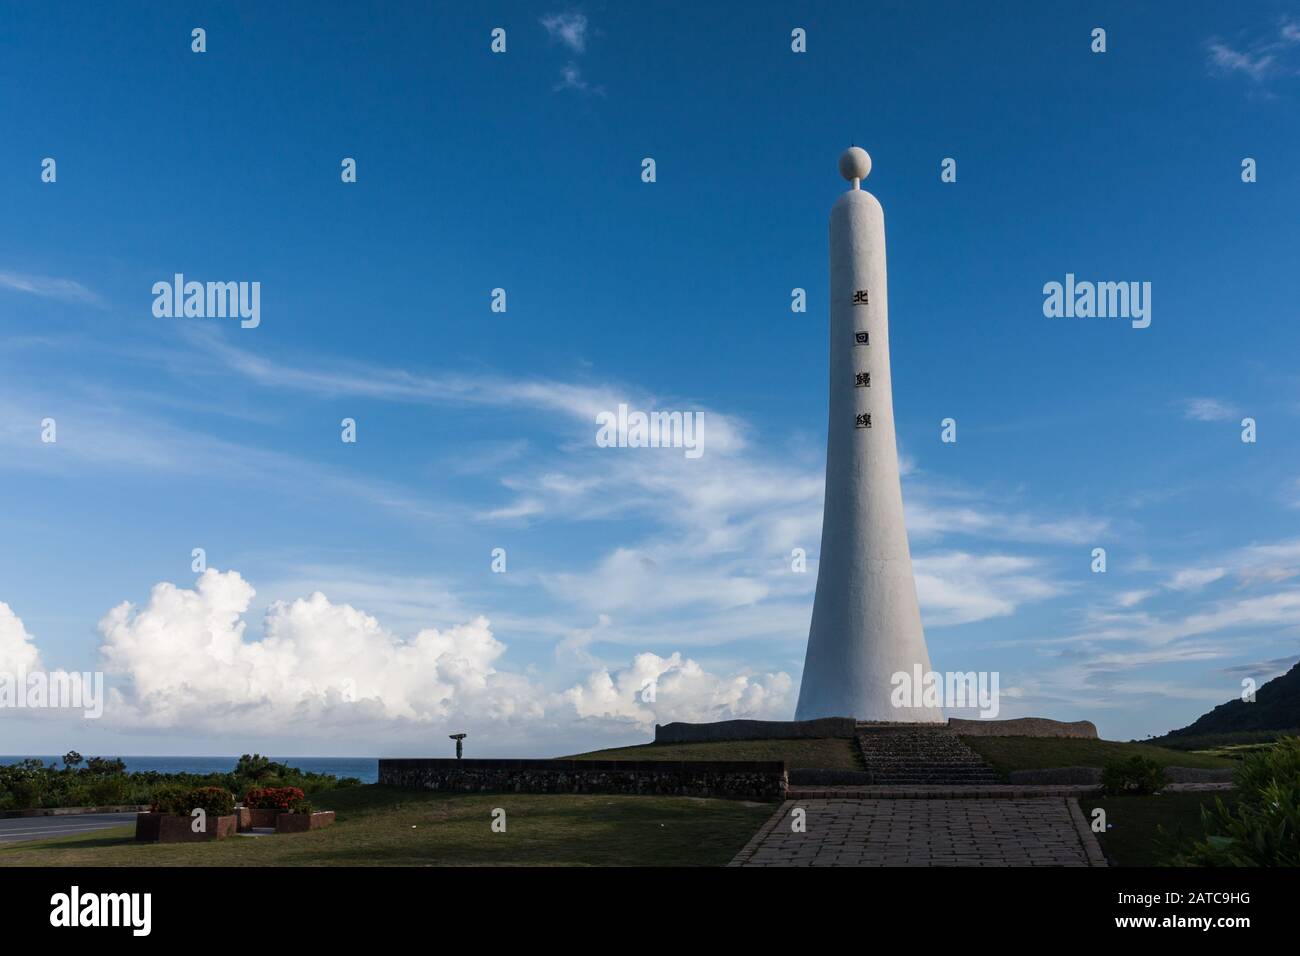 Tropic of Cancer Maker monument, landmark along Provincial Highway 11 (Hualien-Taitung Coastal Highway), Fengbin Township, Hualien County, Taiwan Stock Photo